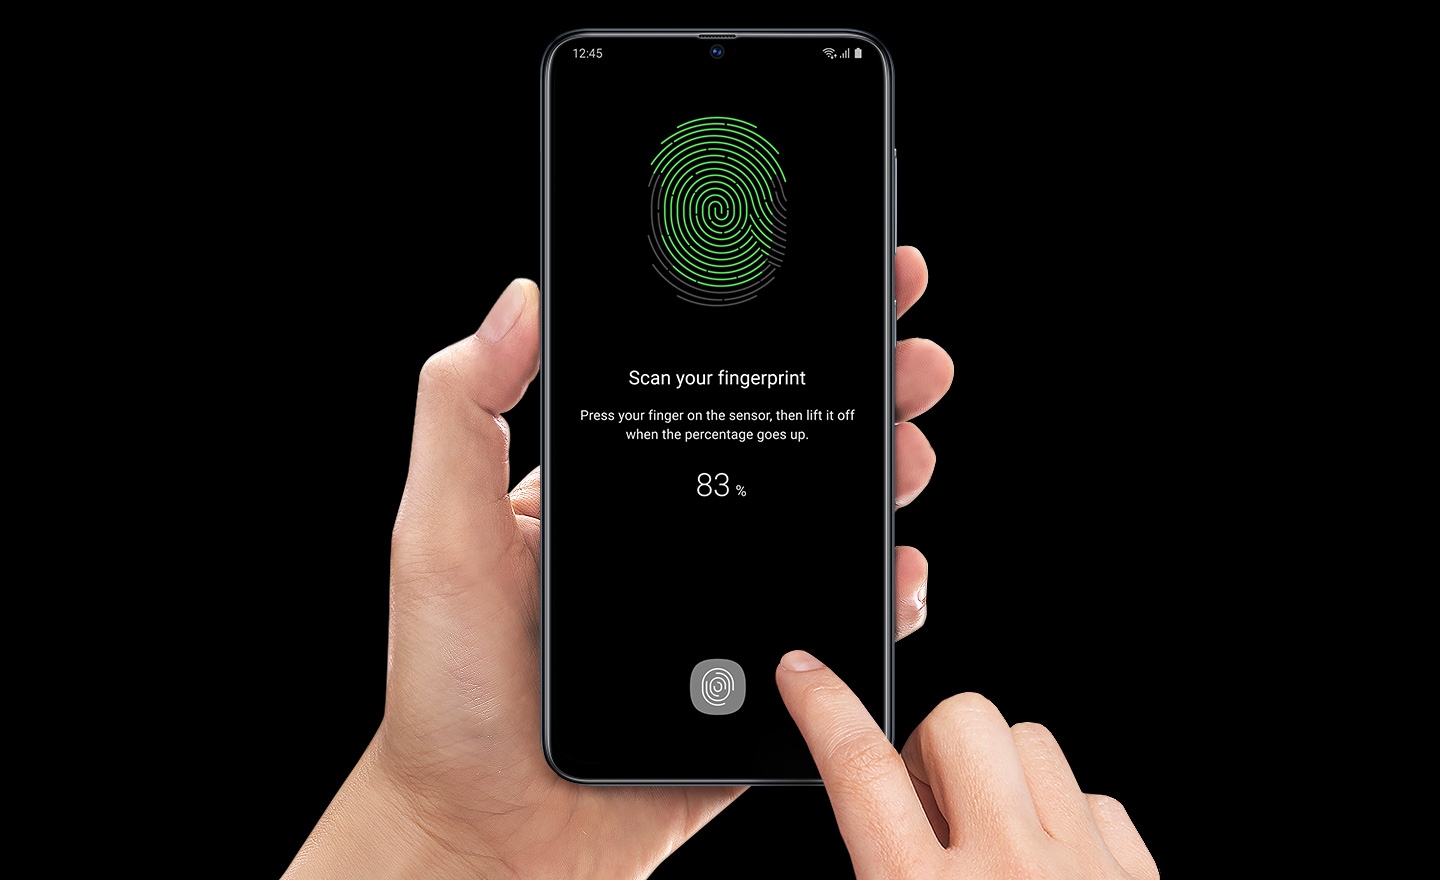 my feature your fingerprint is the key 159435127?$FB TYPE A JPG$